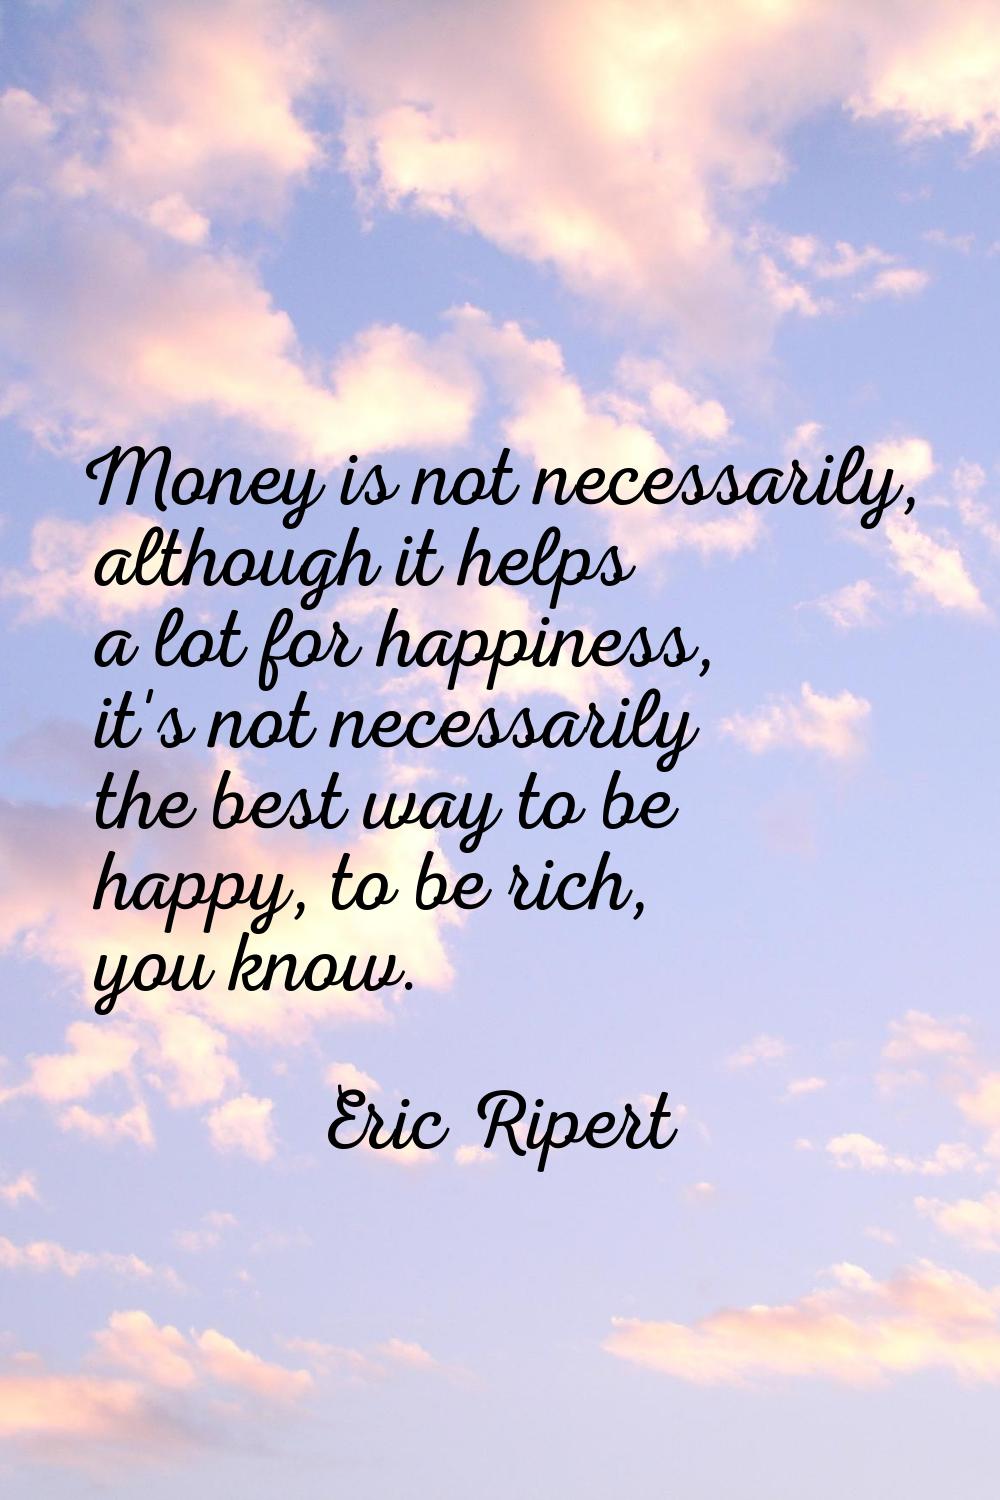 Money is not necessarily, although it helps a lot for happiness, it's not necessarily the best way 